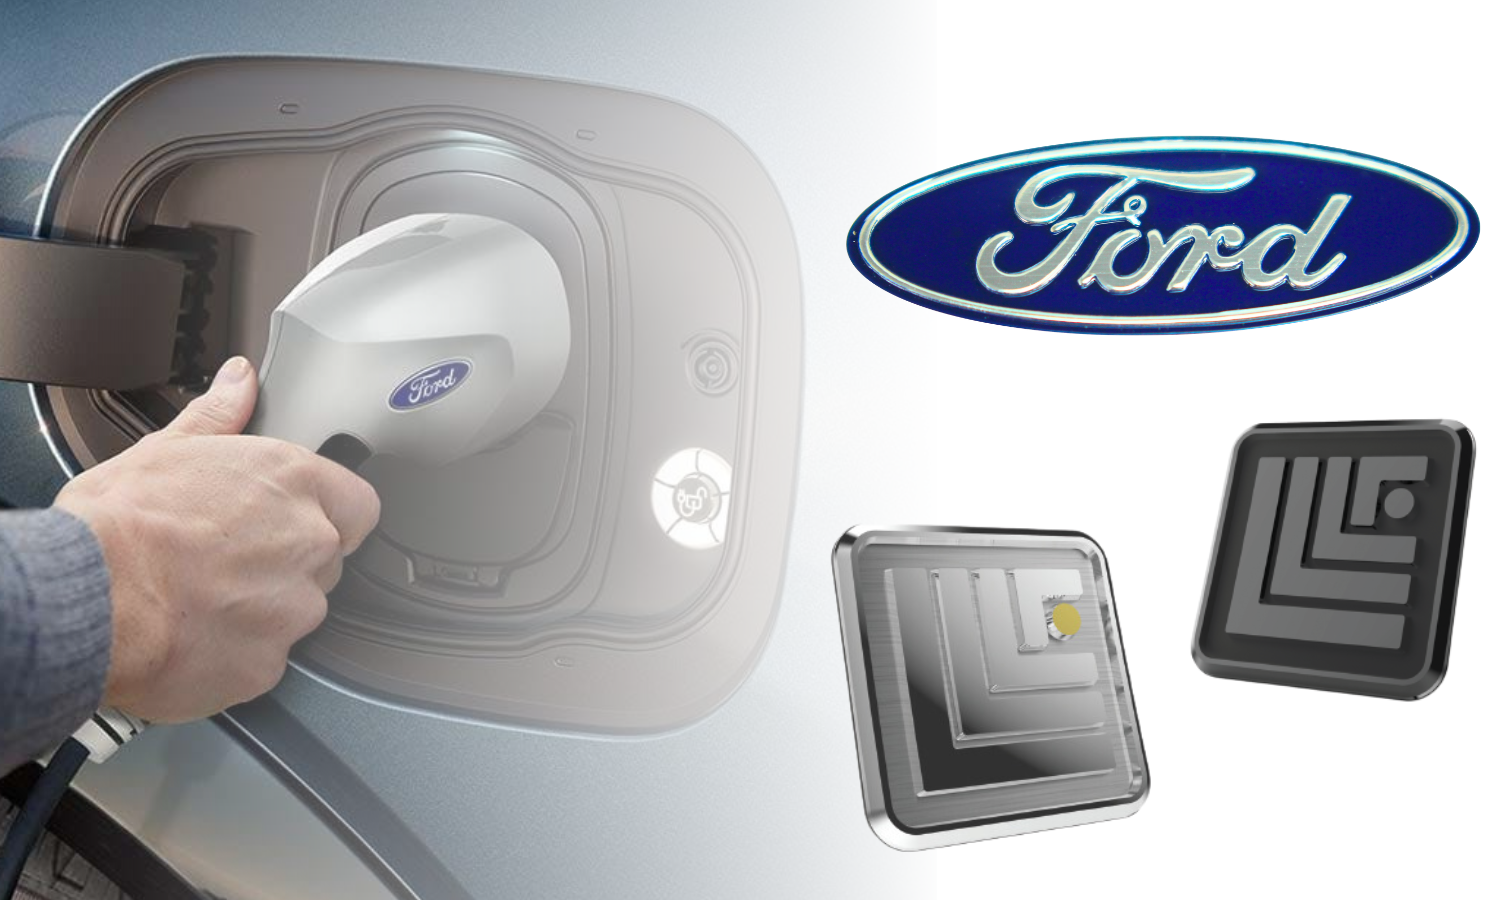 ford blue oval logo, electric vehicle charging device with ford blue oval logo, square logo with 3 Ls and 1 F in a bright chrome, square logo with 3 Ls and 1 F in a dark chrome finish